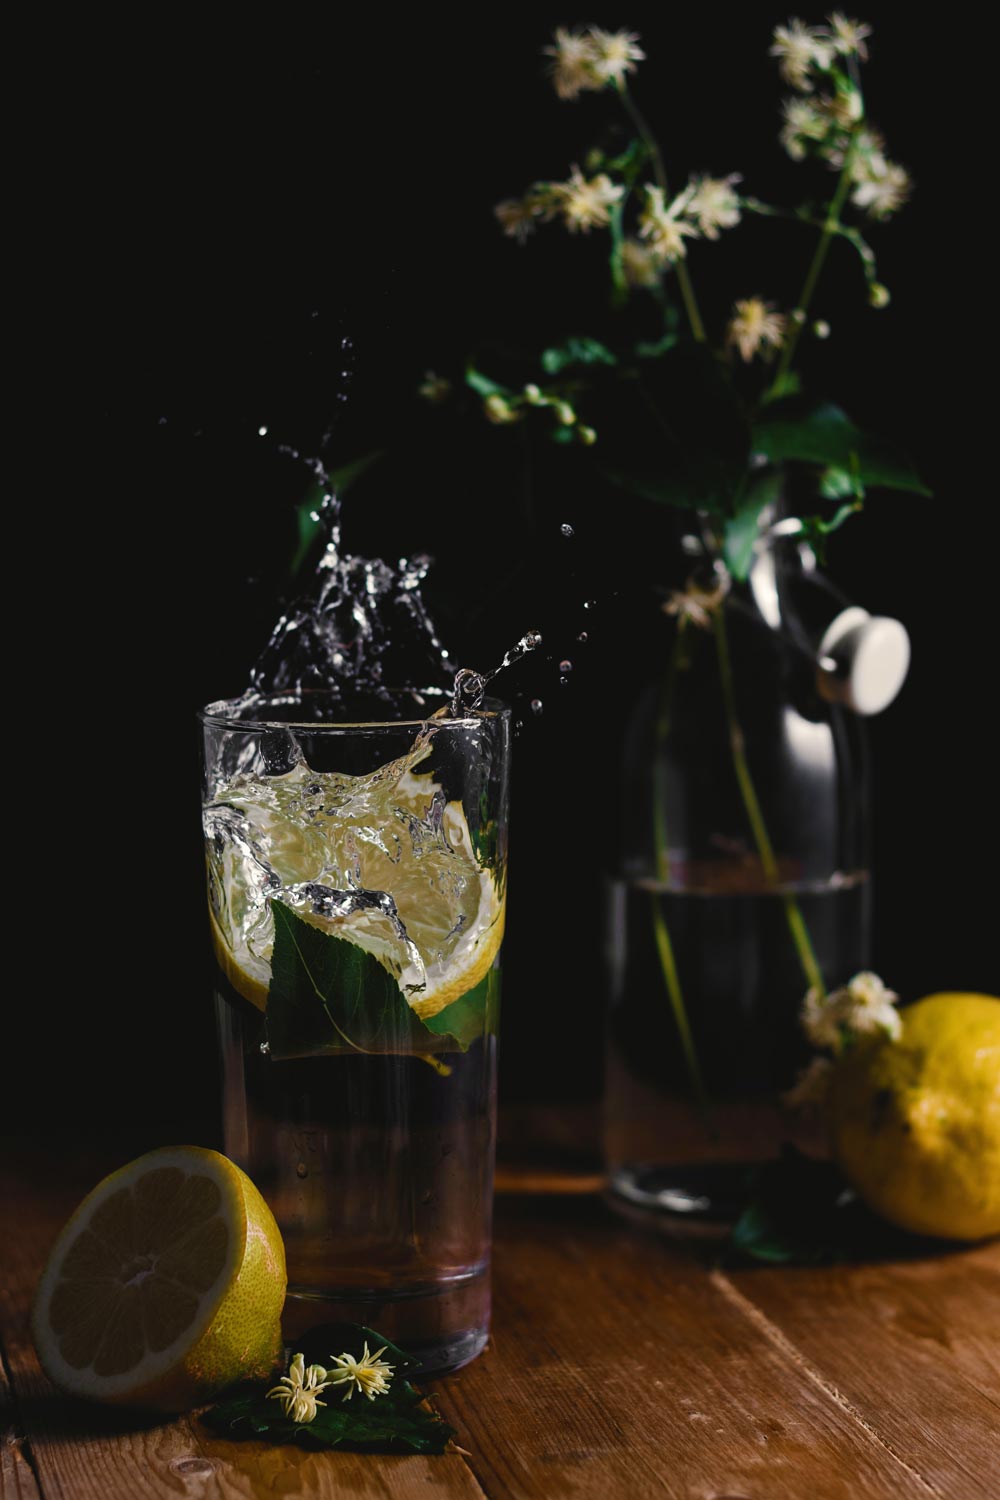 Glass of water with lemon slices and flowers on a wooden table